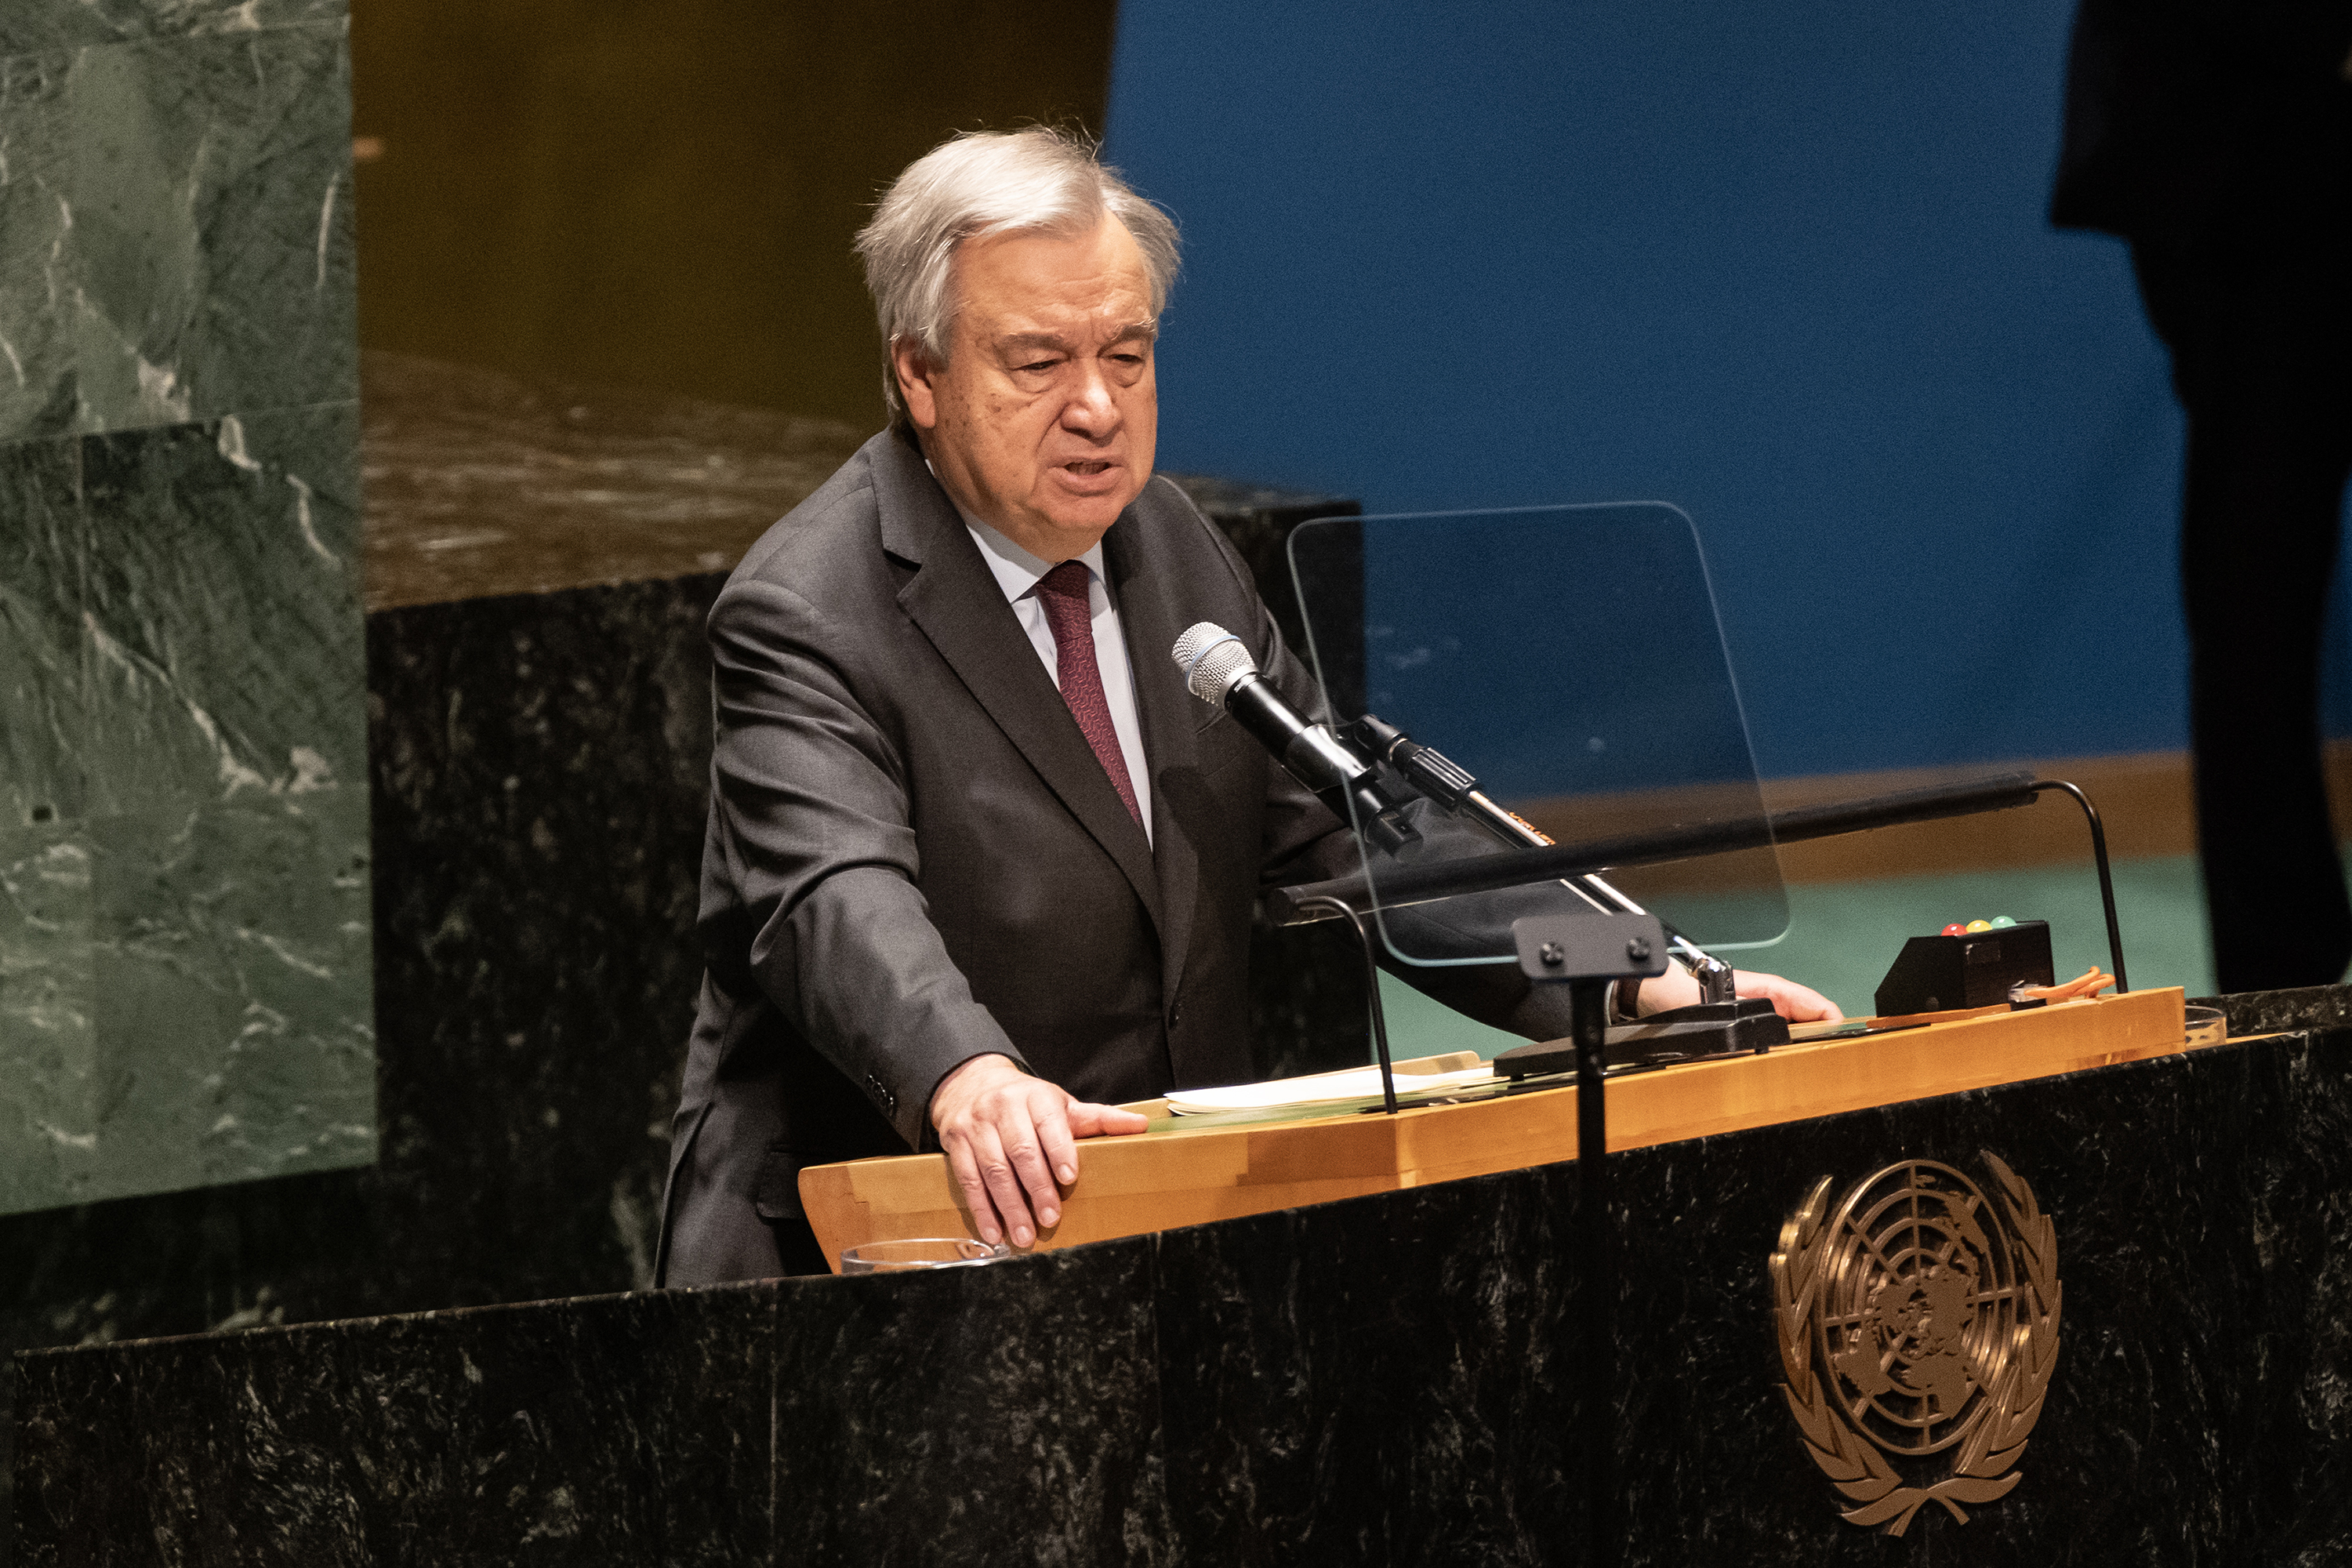 The UN chief Antonio Guterres speaks at UN Headquarters in New York, on January 26.